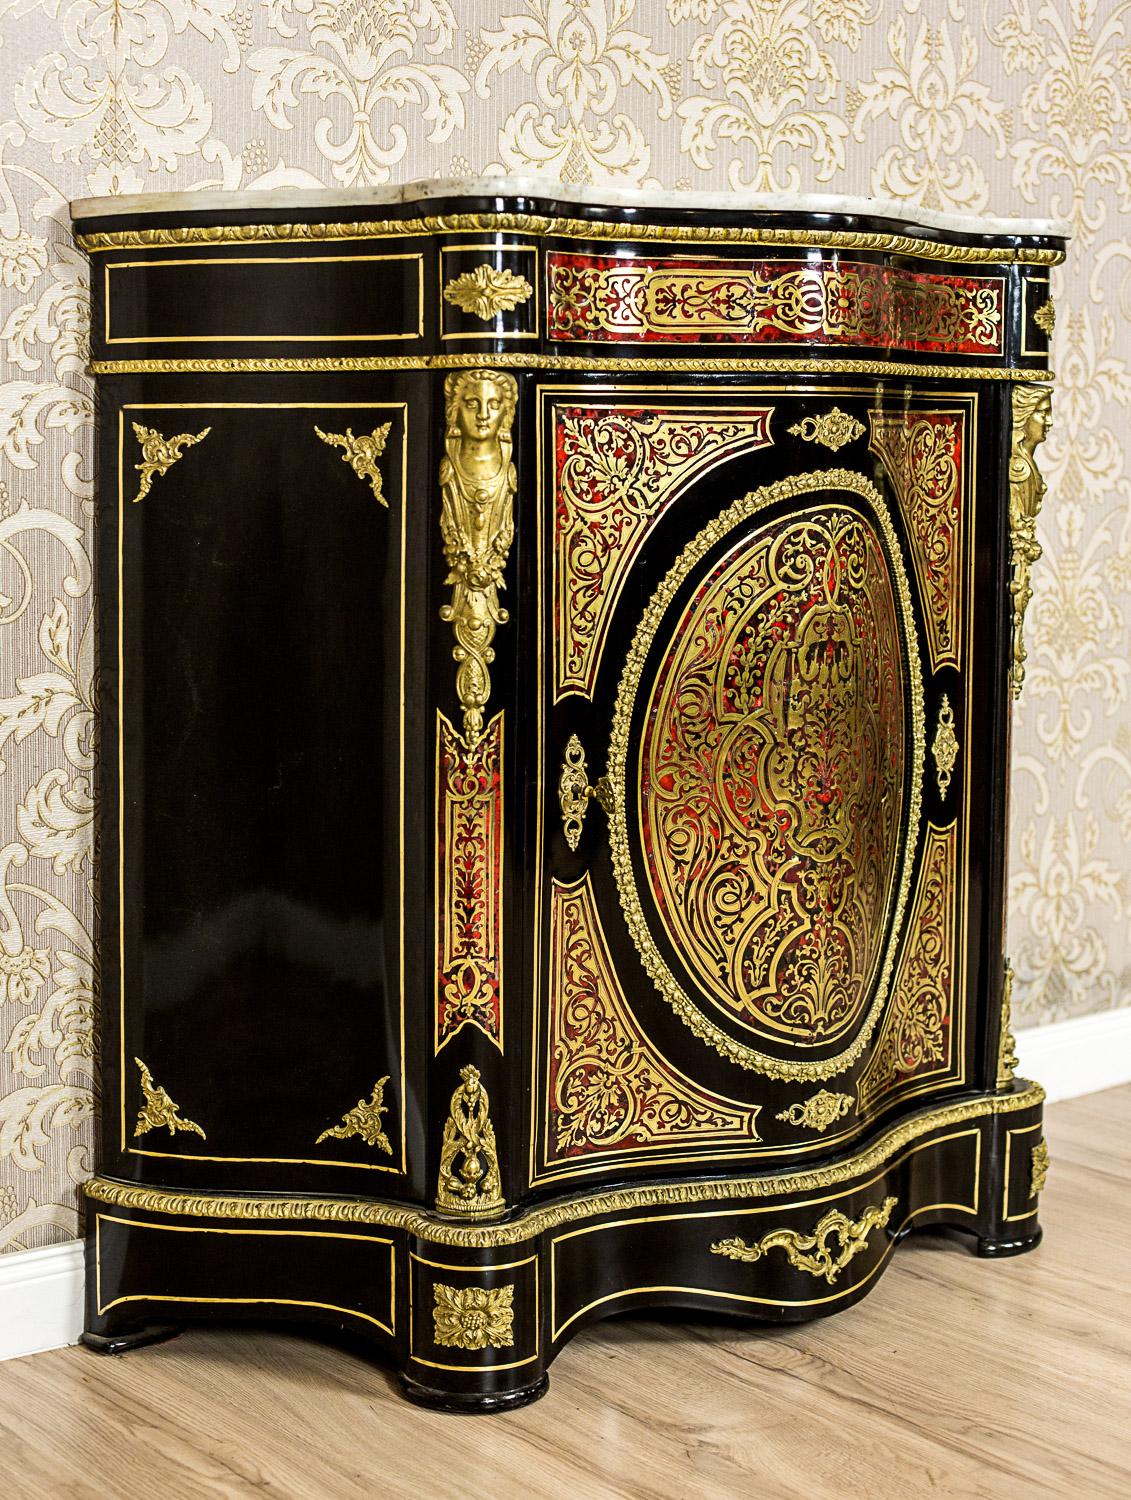 Baroque Revival Neo-Baroque Commode in the Boulle Type from 19th Century